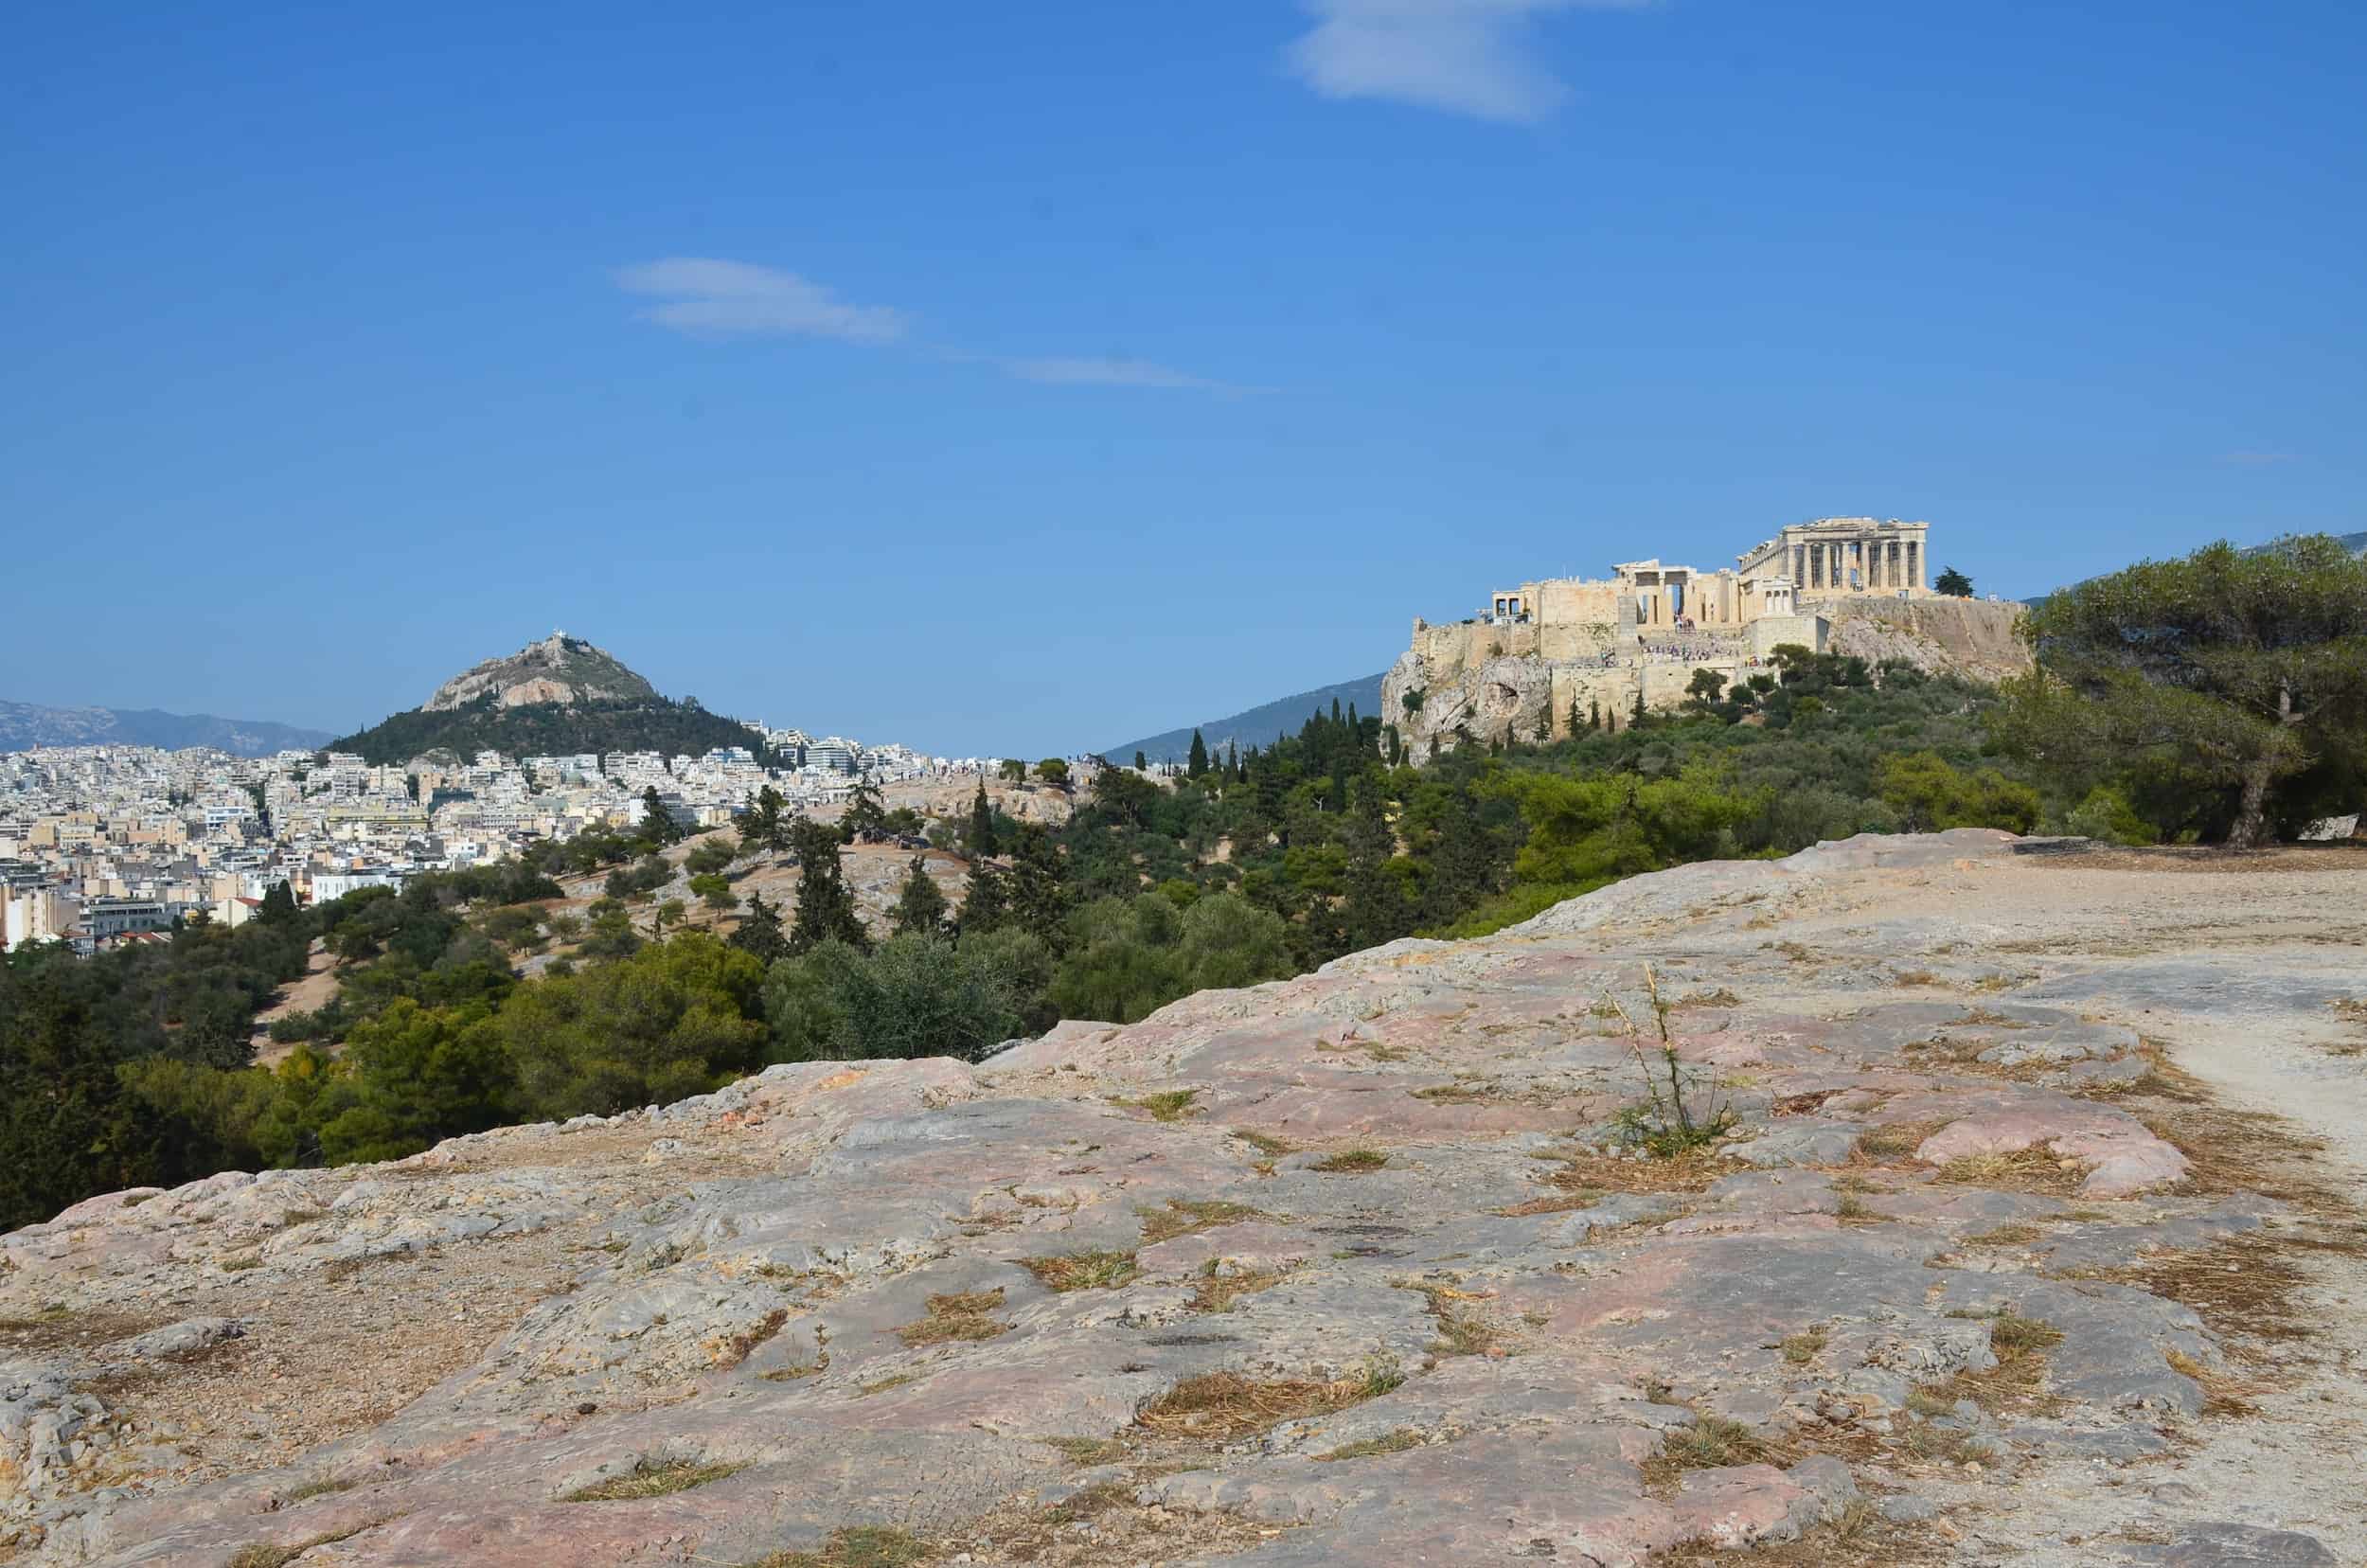 View of Lycabettus Hill (left) and the Acropolis (right) from the Pnyx in Athens, Greece